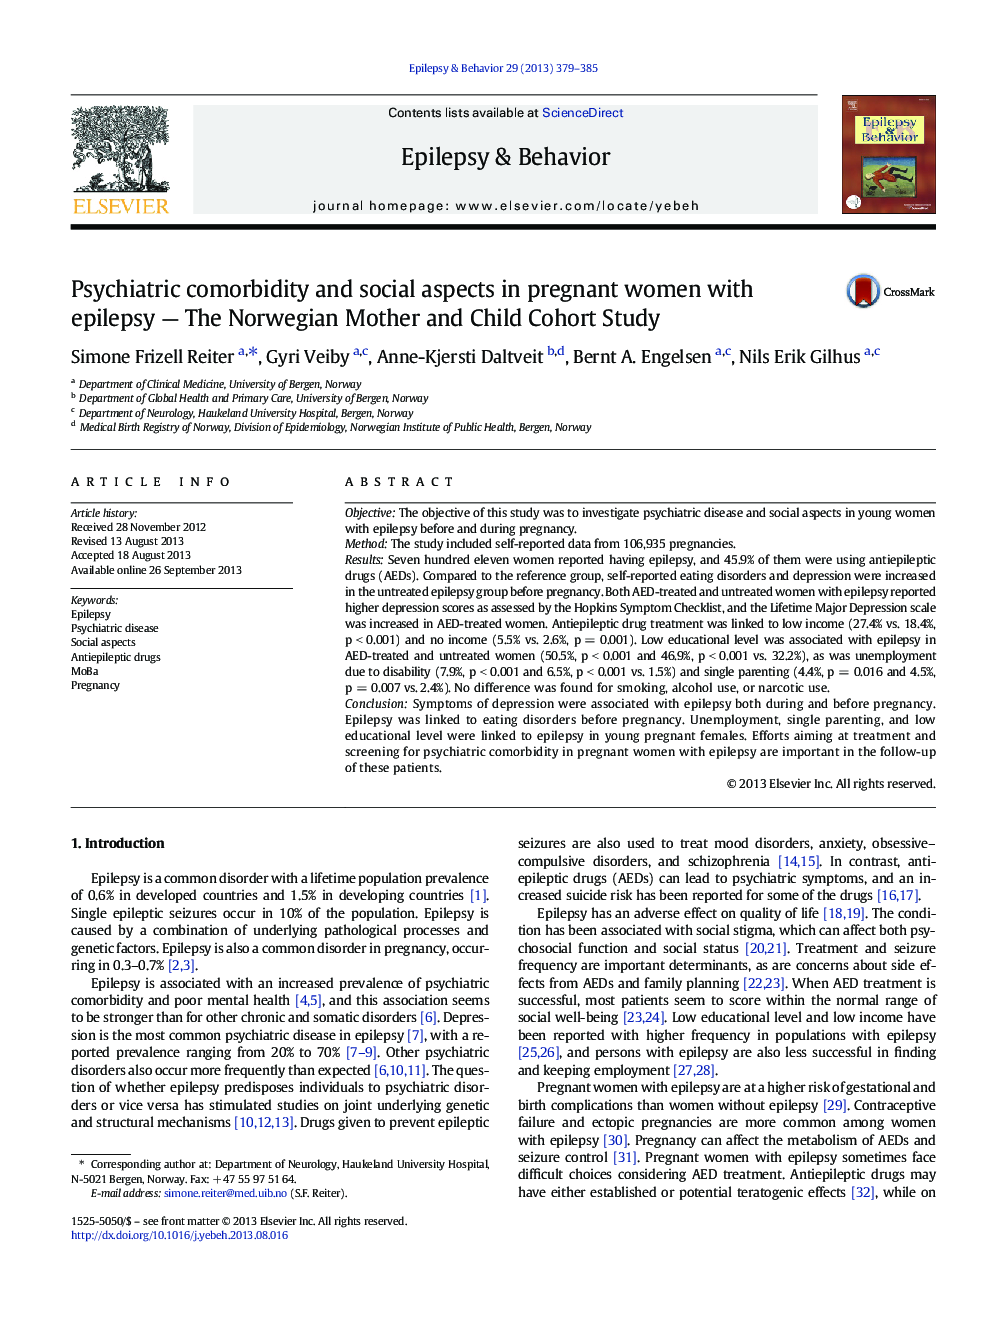 Psychiatric comorbidity and social aspects in pregnant women with epilepsy — The Norwegian Mother and Child Cohort Study